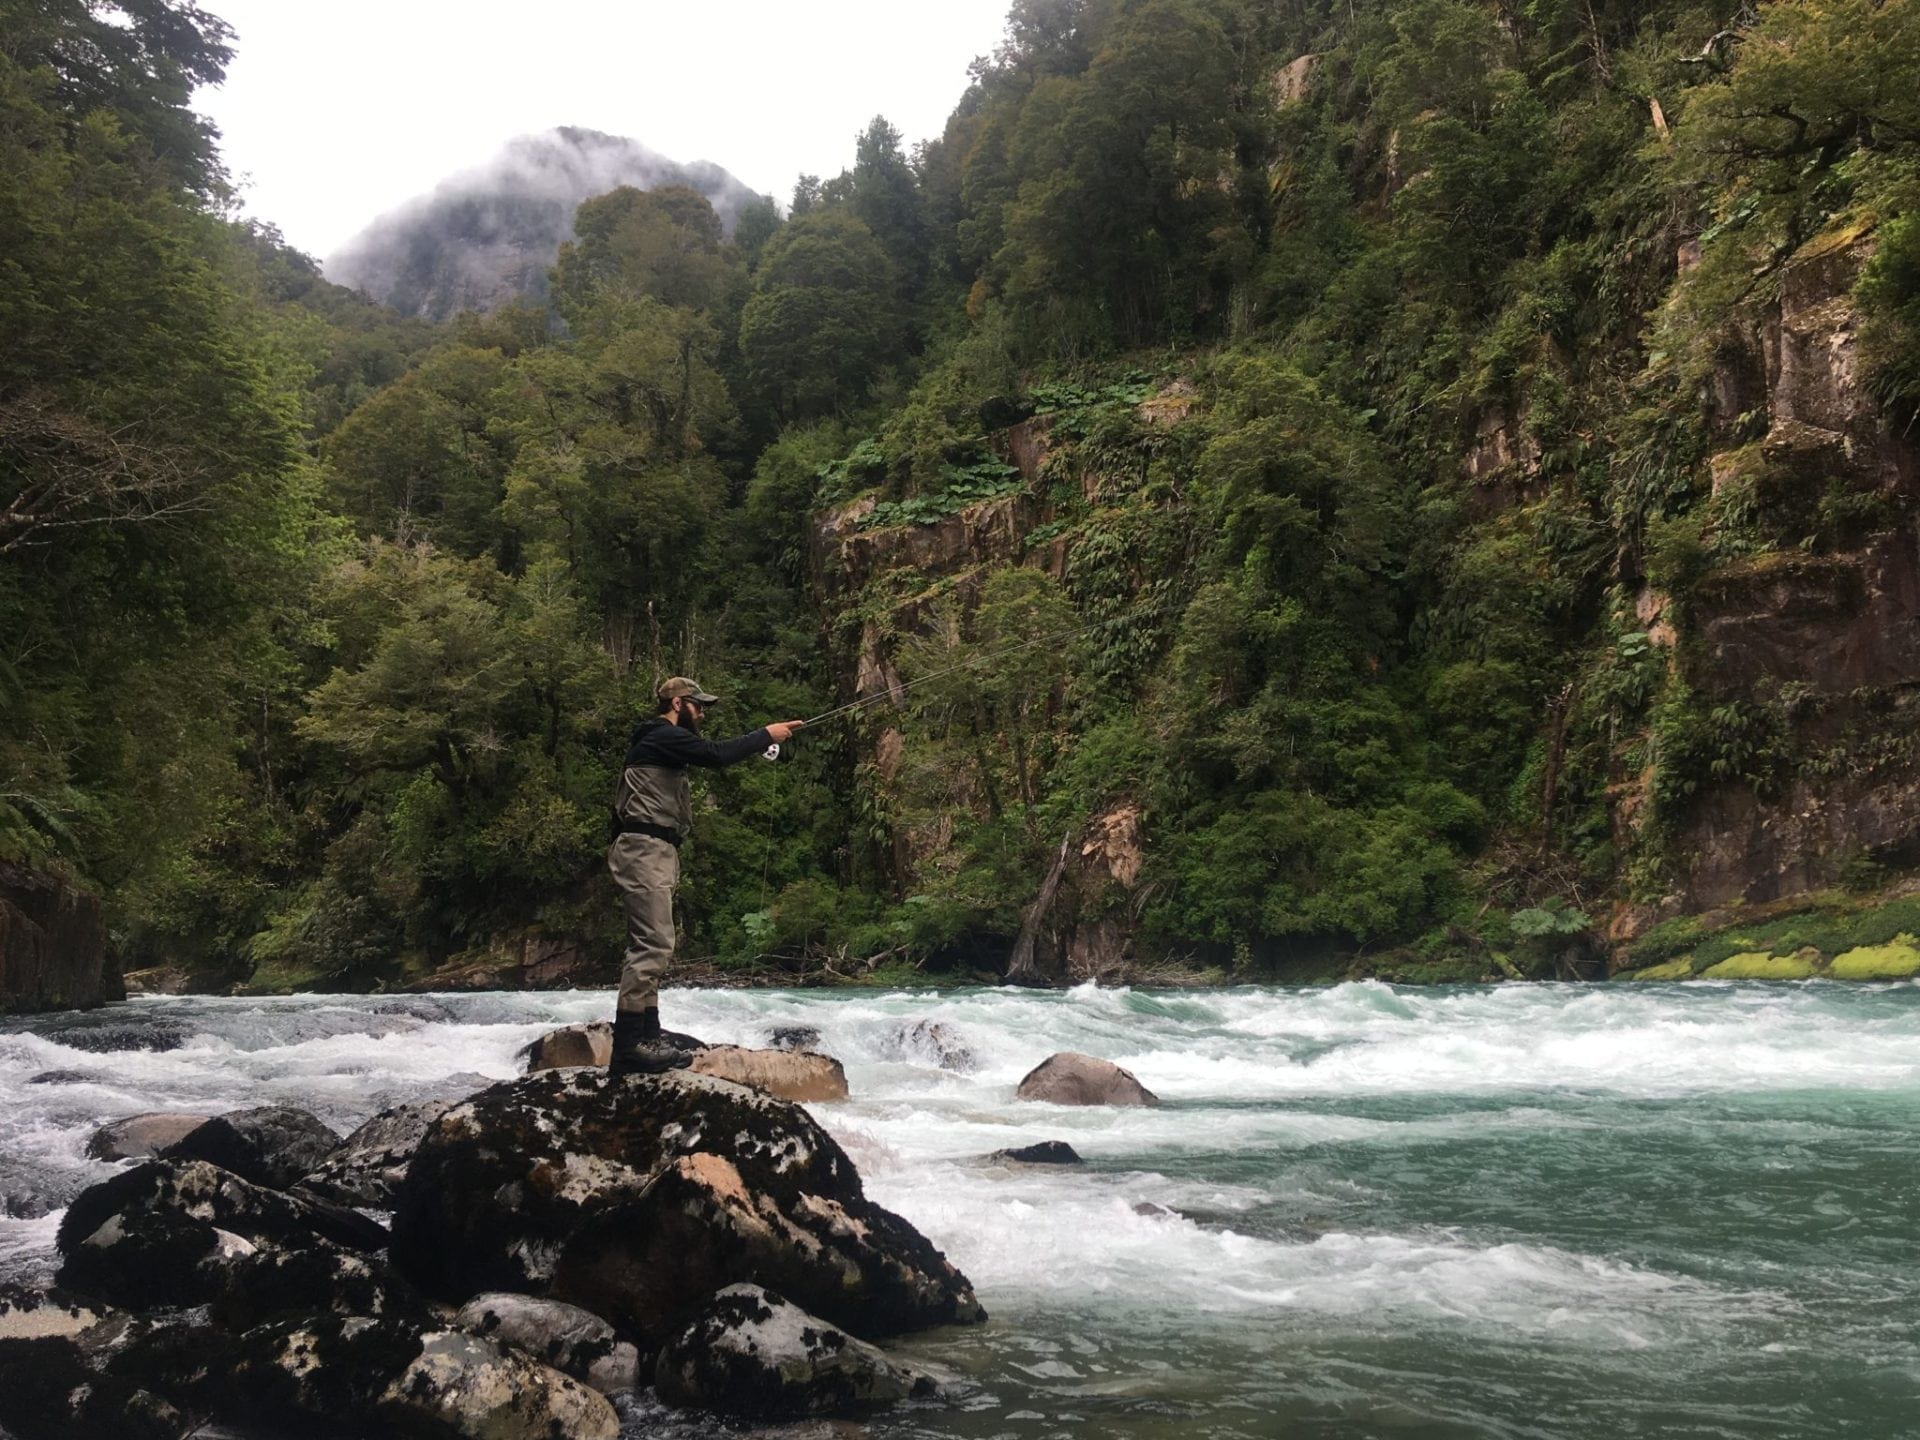 Fly fishing on the rocks in the Patagonia canyon